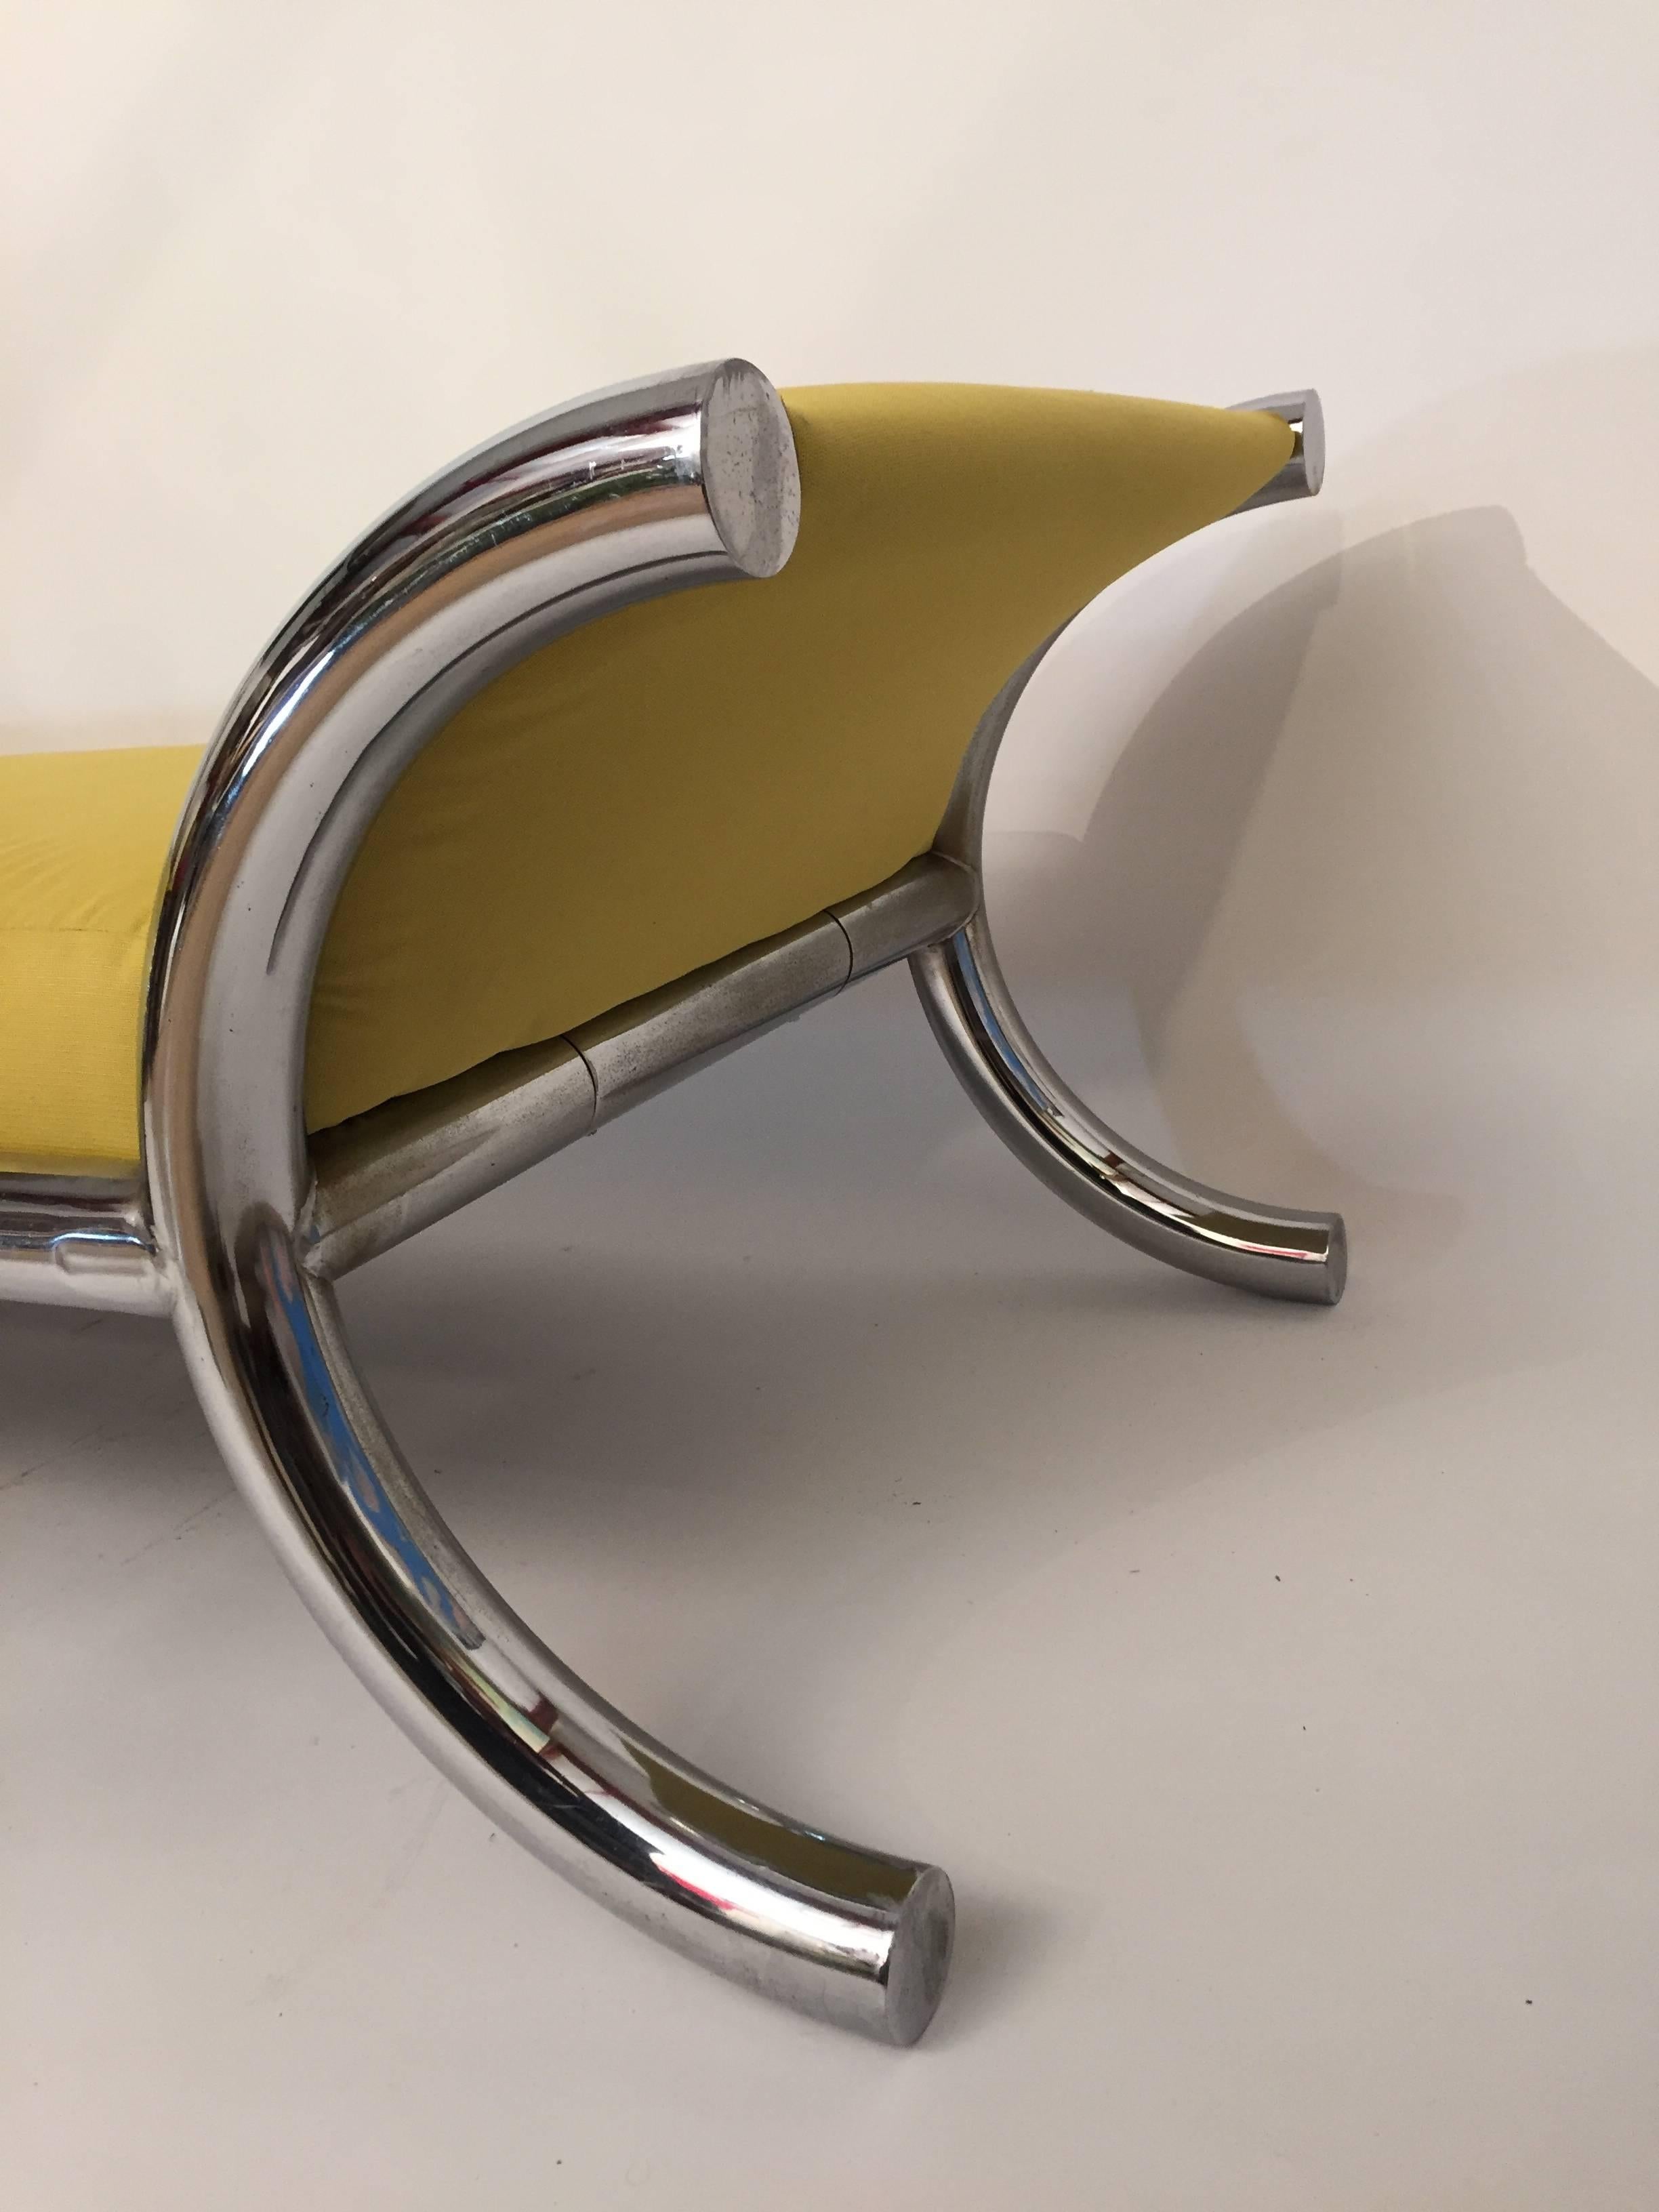 Simple, sexy Italian design at its best. Tubular chrome frame supports two integrated curved side cushions and a single, long rectangular cushion. Signed, Made in Italy.